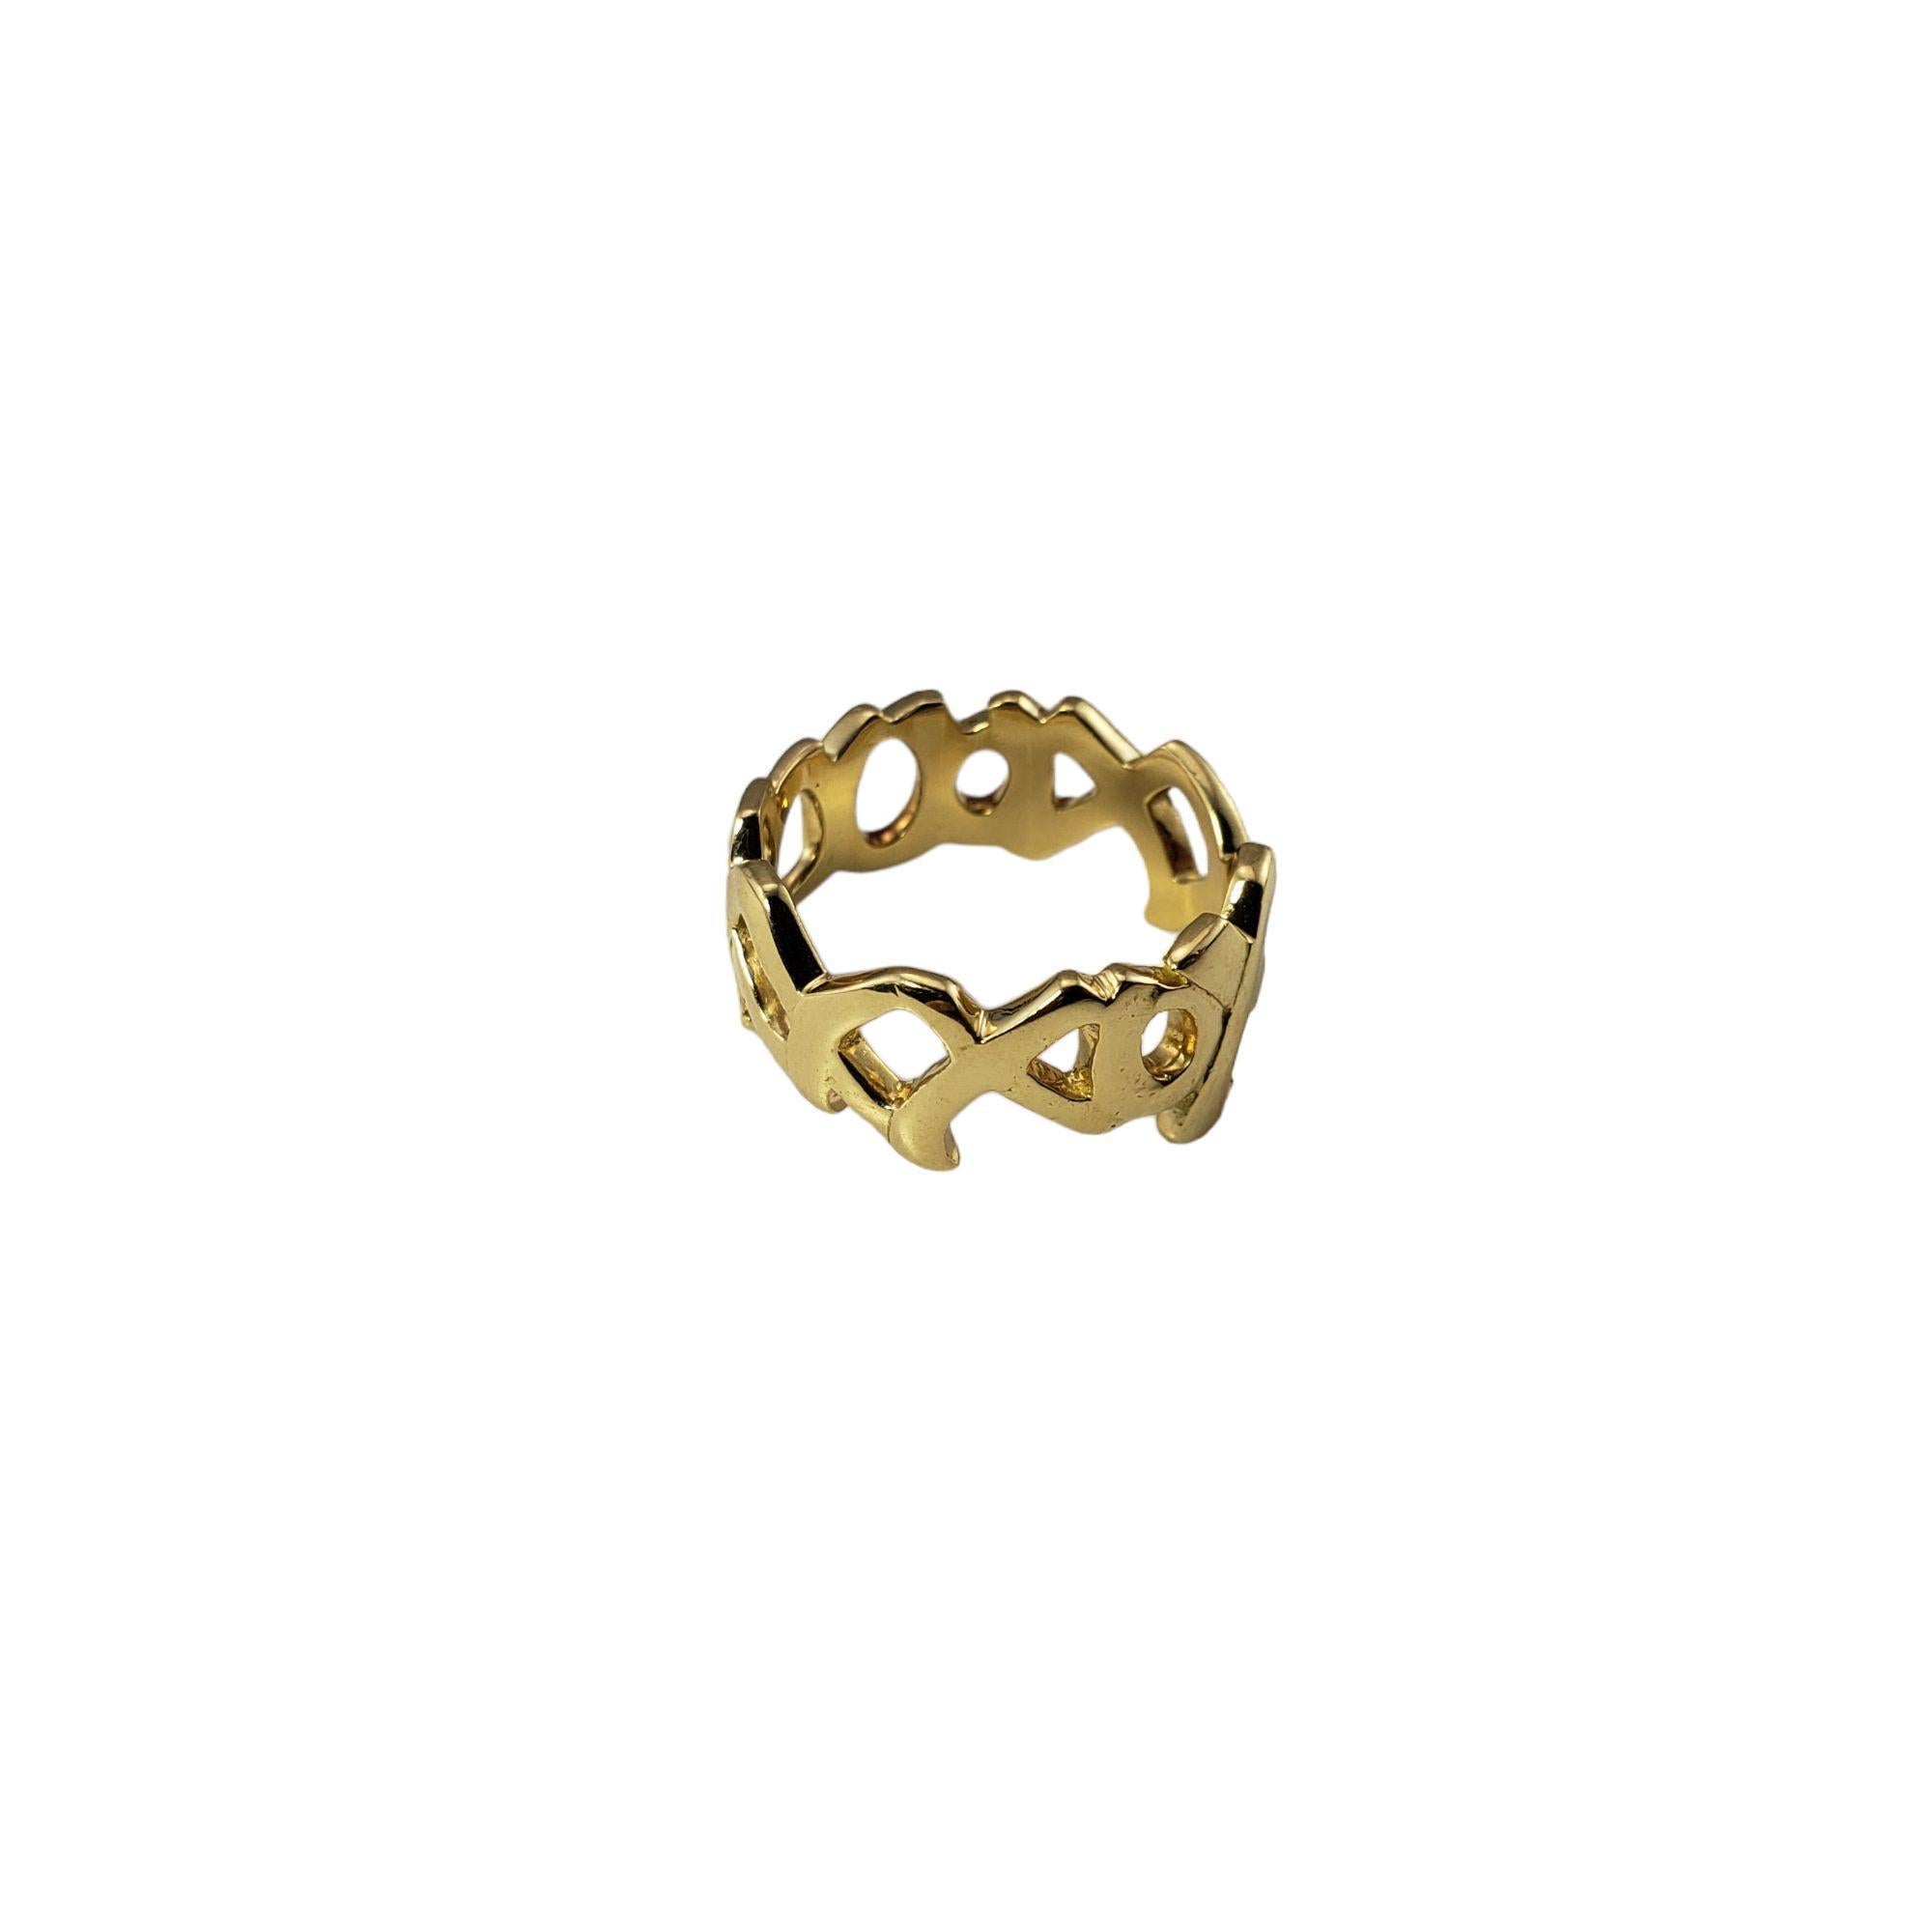 Tiffany&Co. Paloma Picasso 18K YellowGold Hugs and Kisses Ring Size 6.75 #15268 2